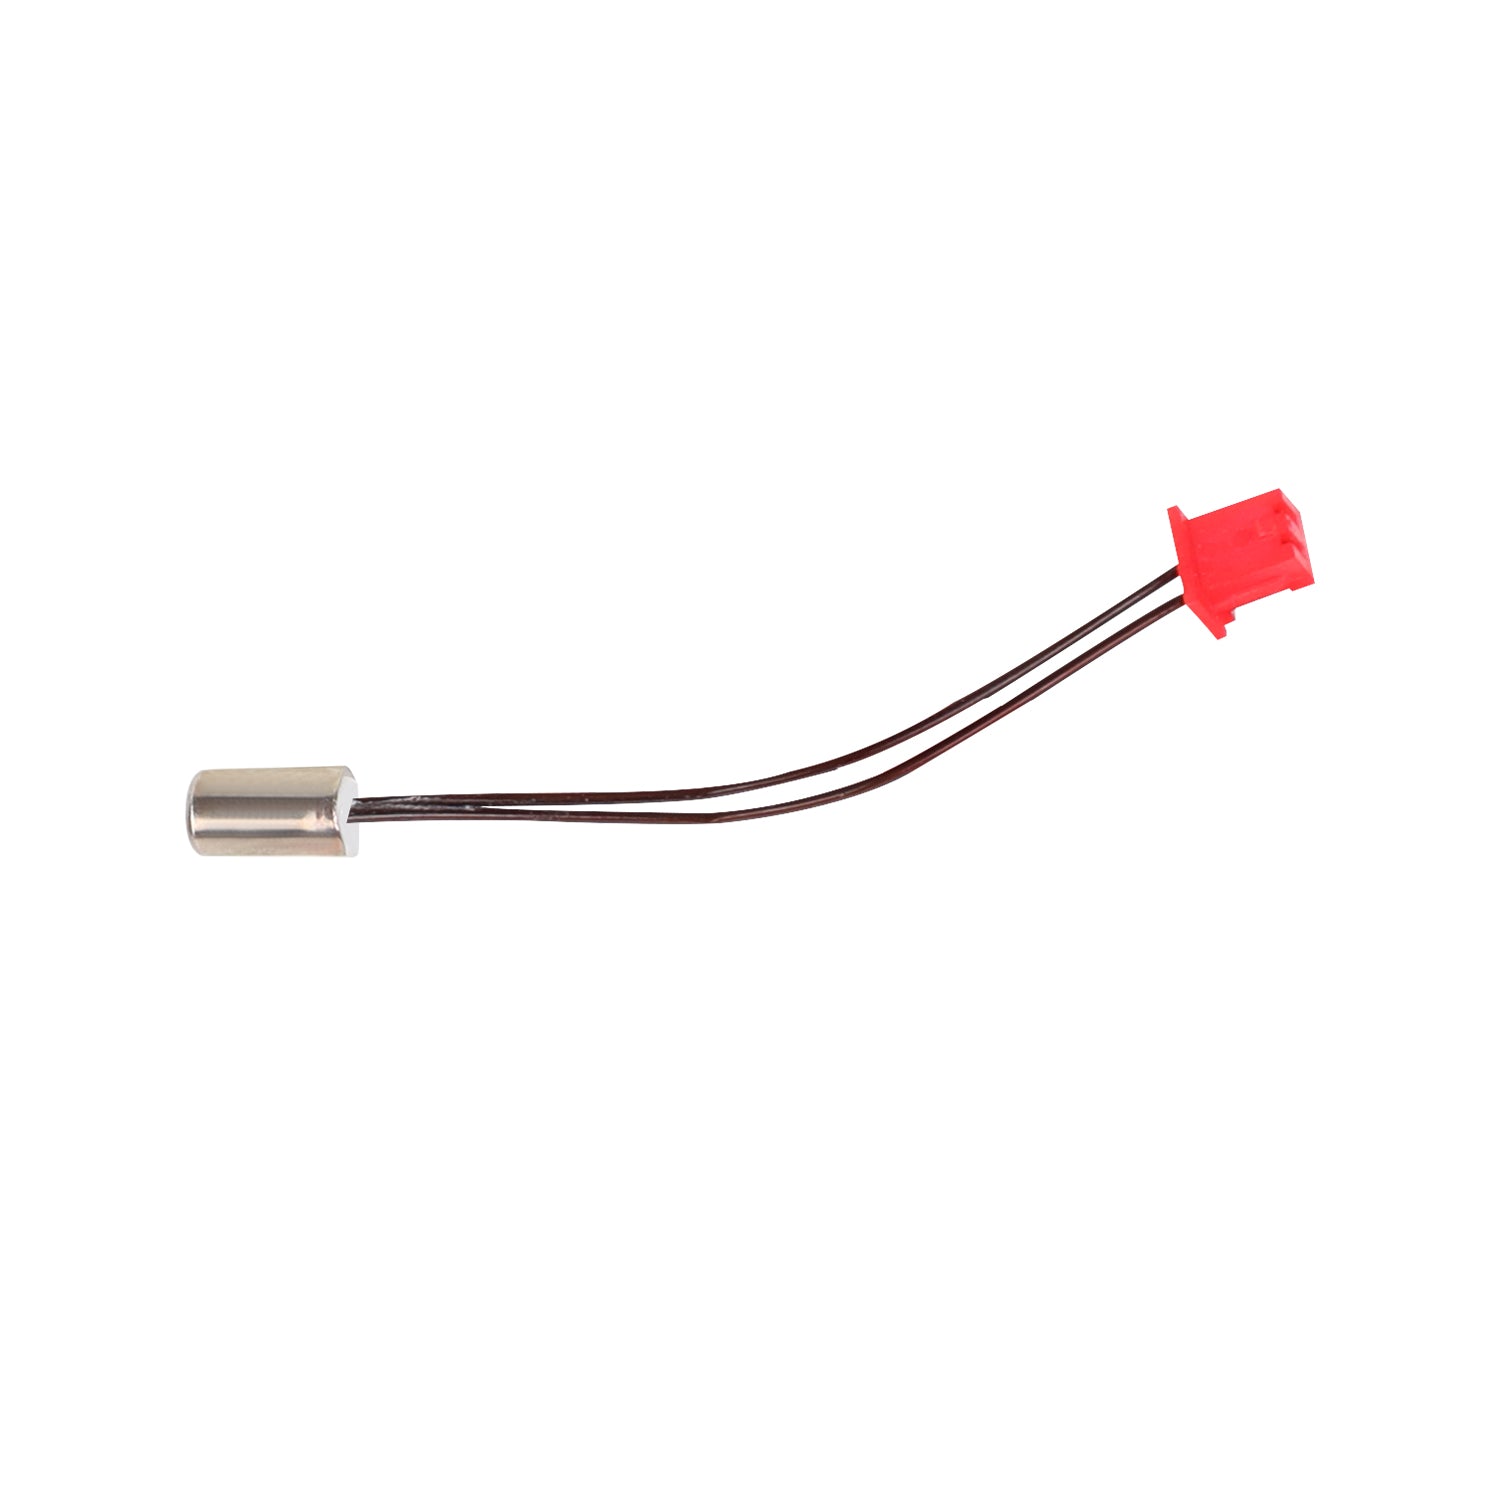 Creality Hotend Thermistor for Creality Ender-3 S1 Pro / Plus, CR-10 Smart Pro